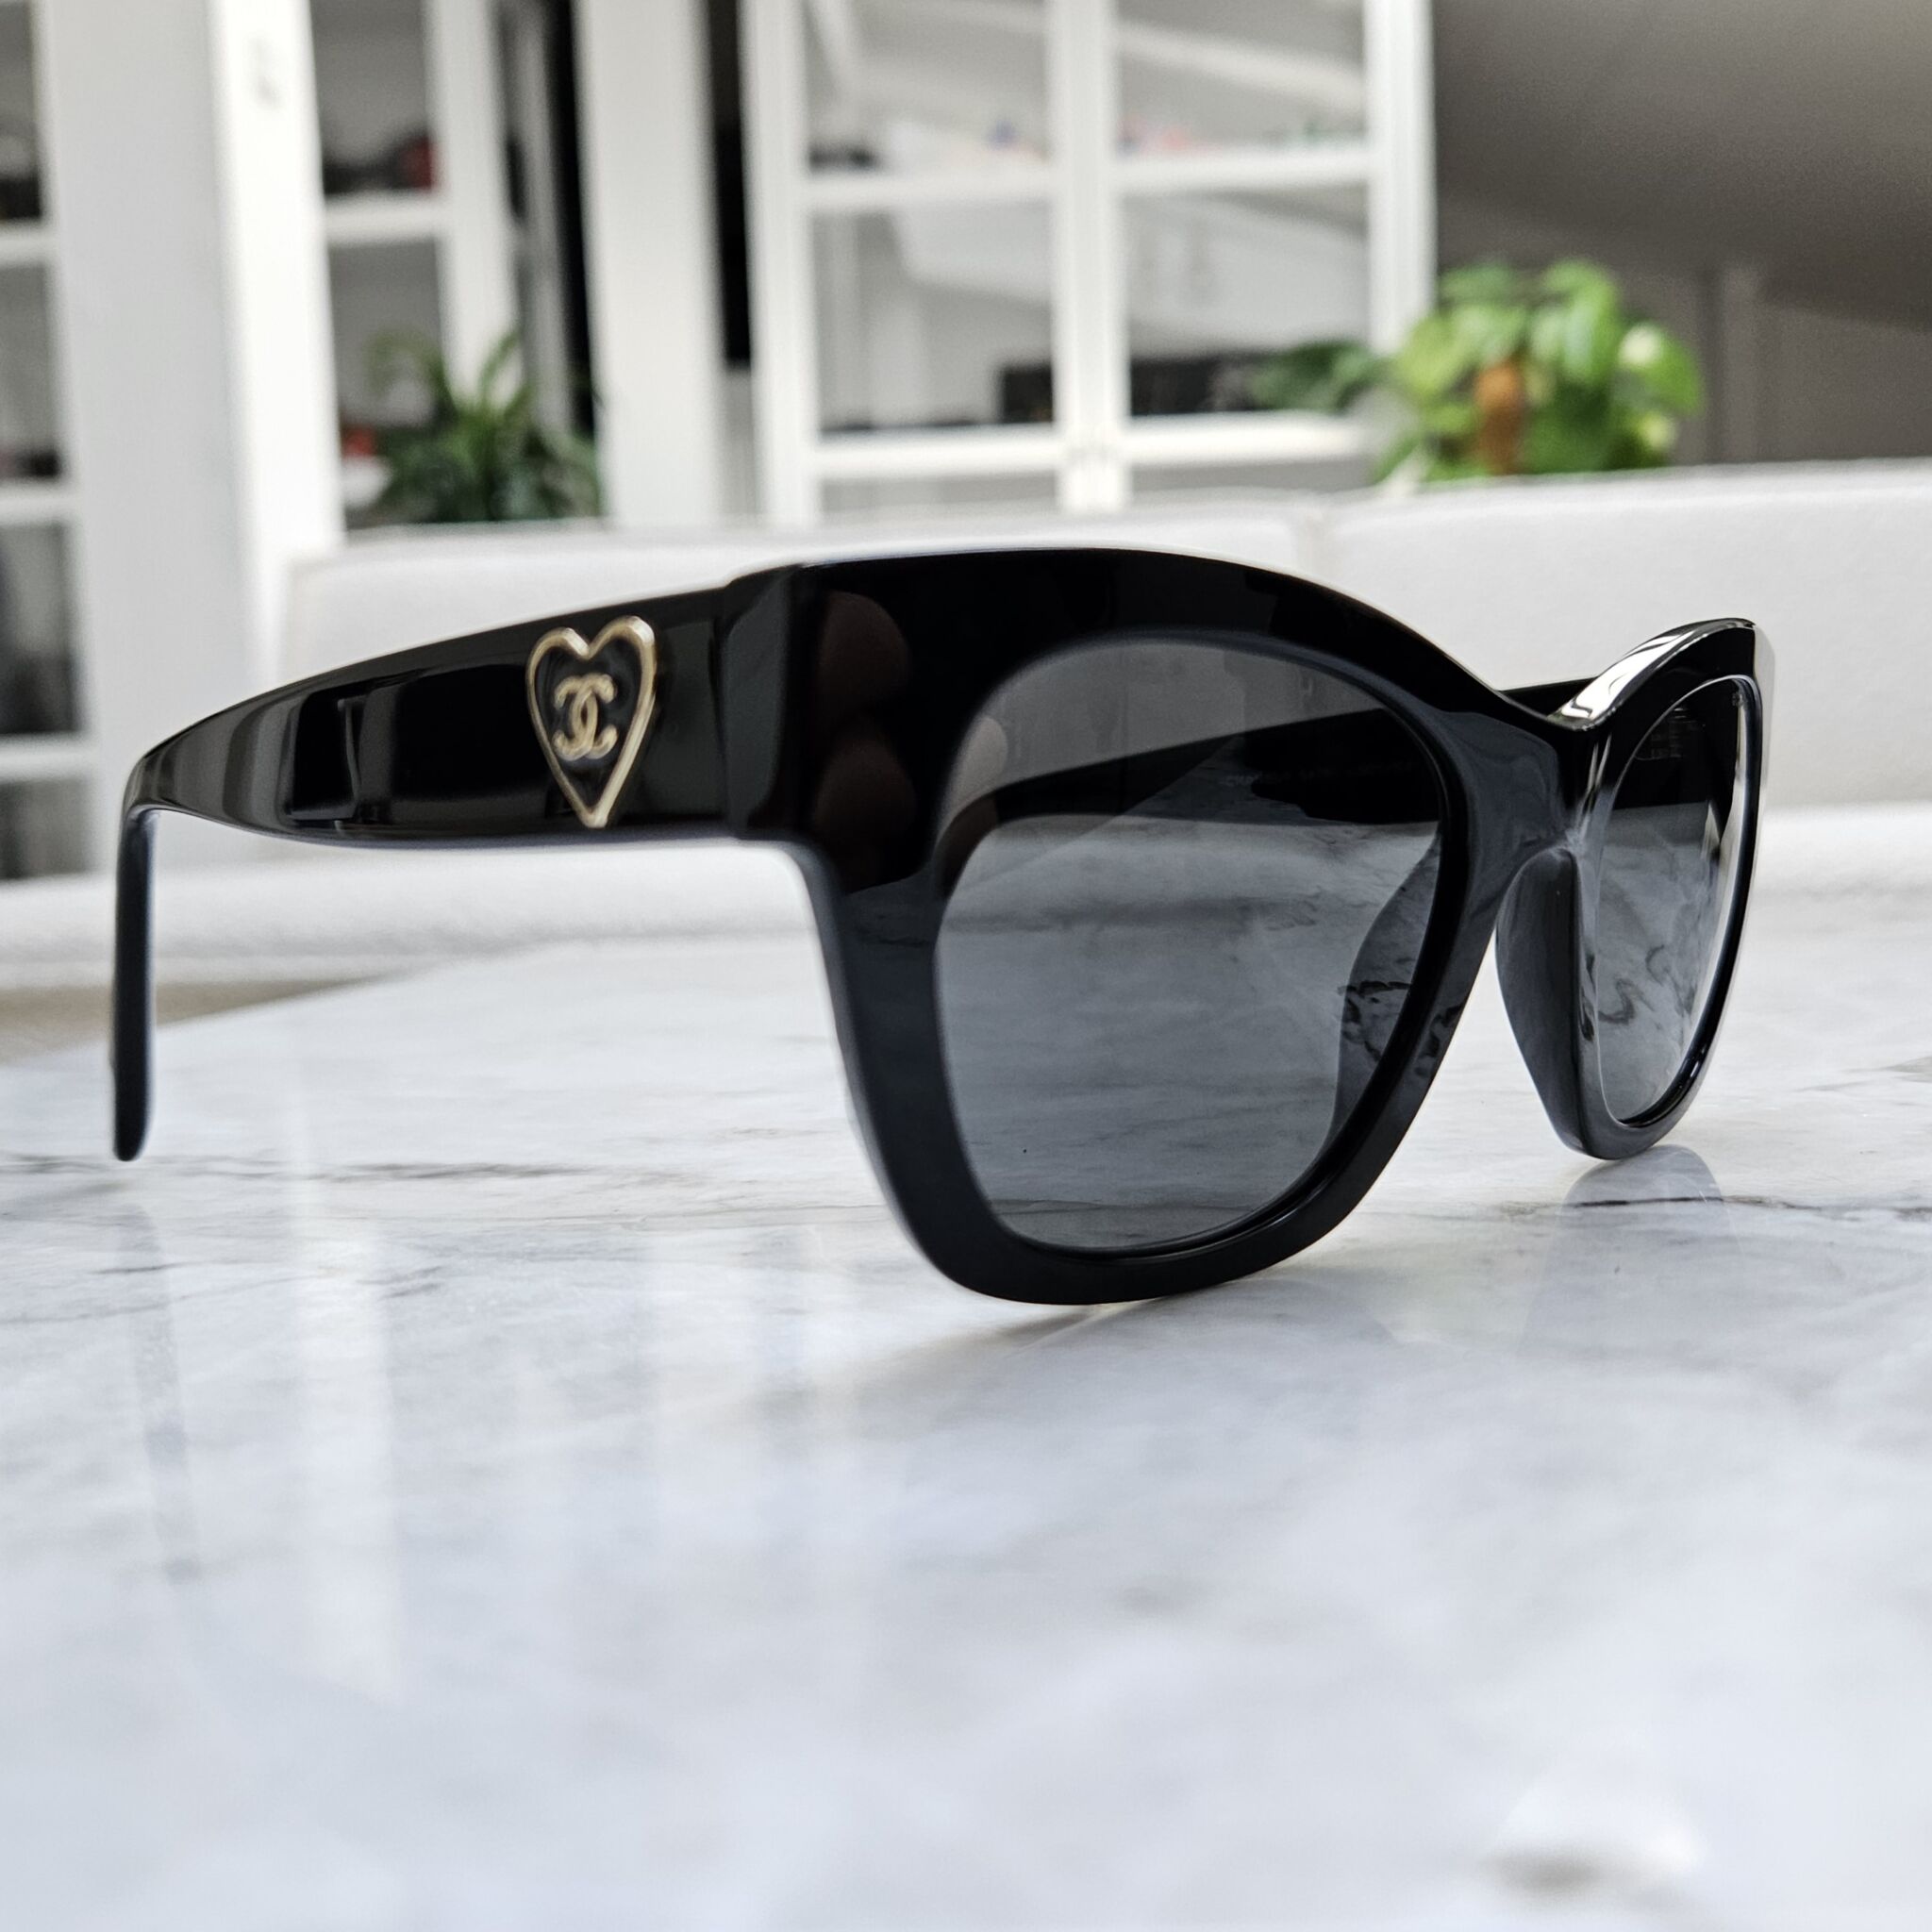 butterfly chanel sunglasses